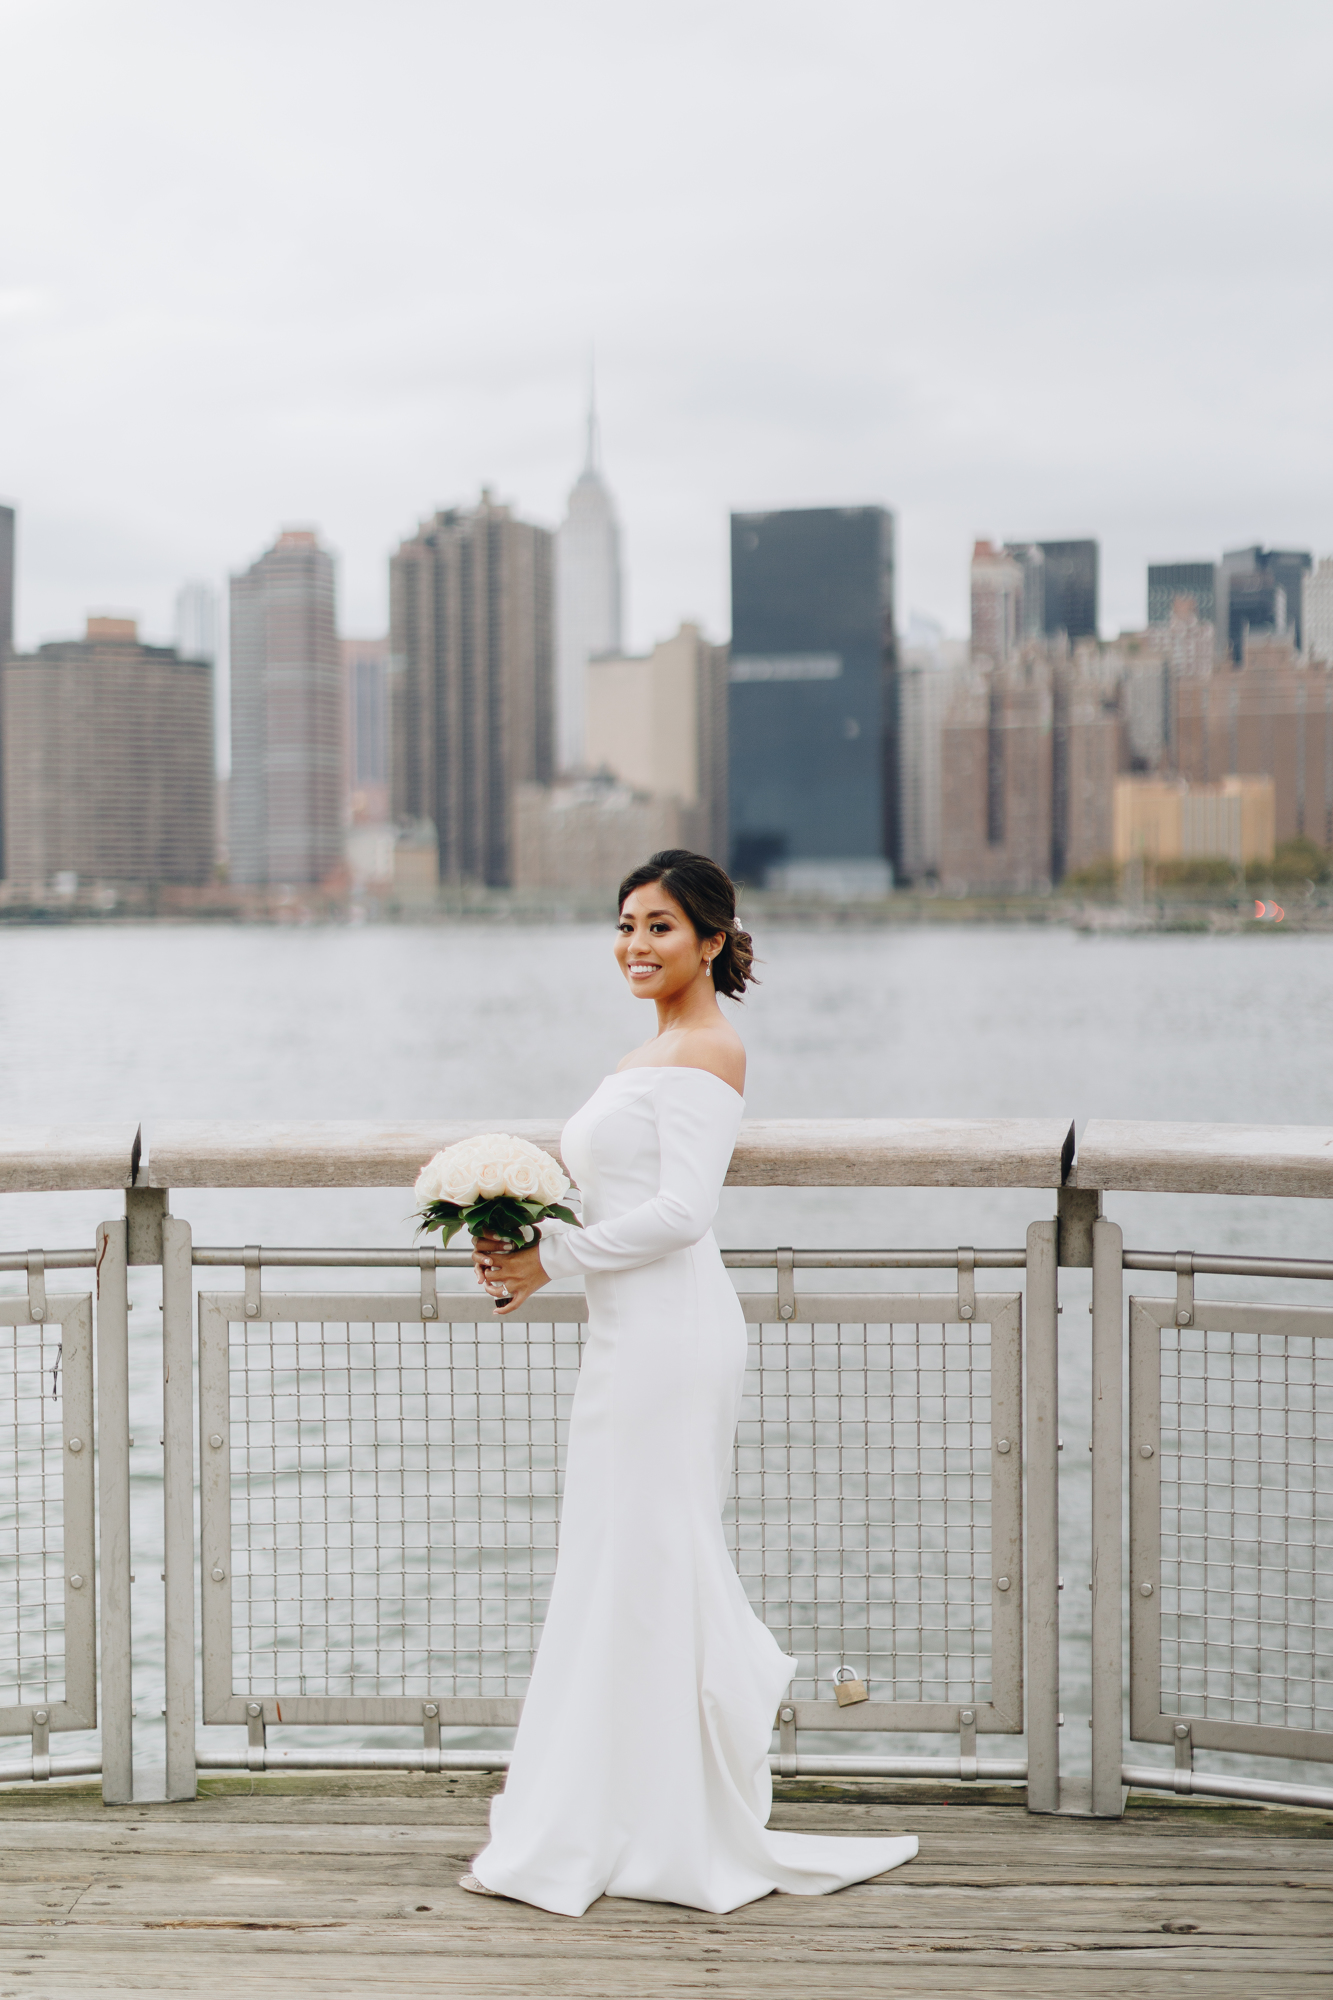 Candid Elopement Photography in NYC